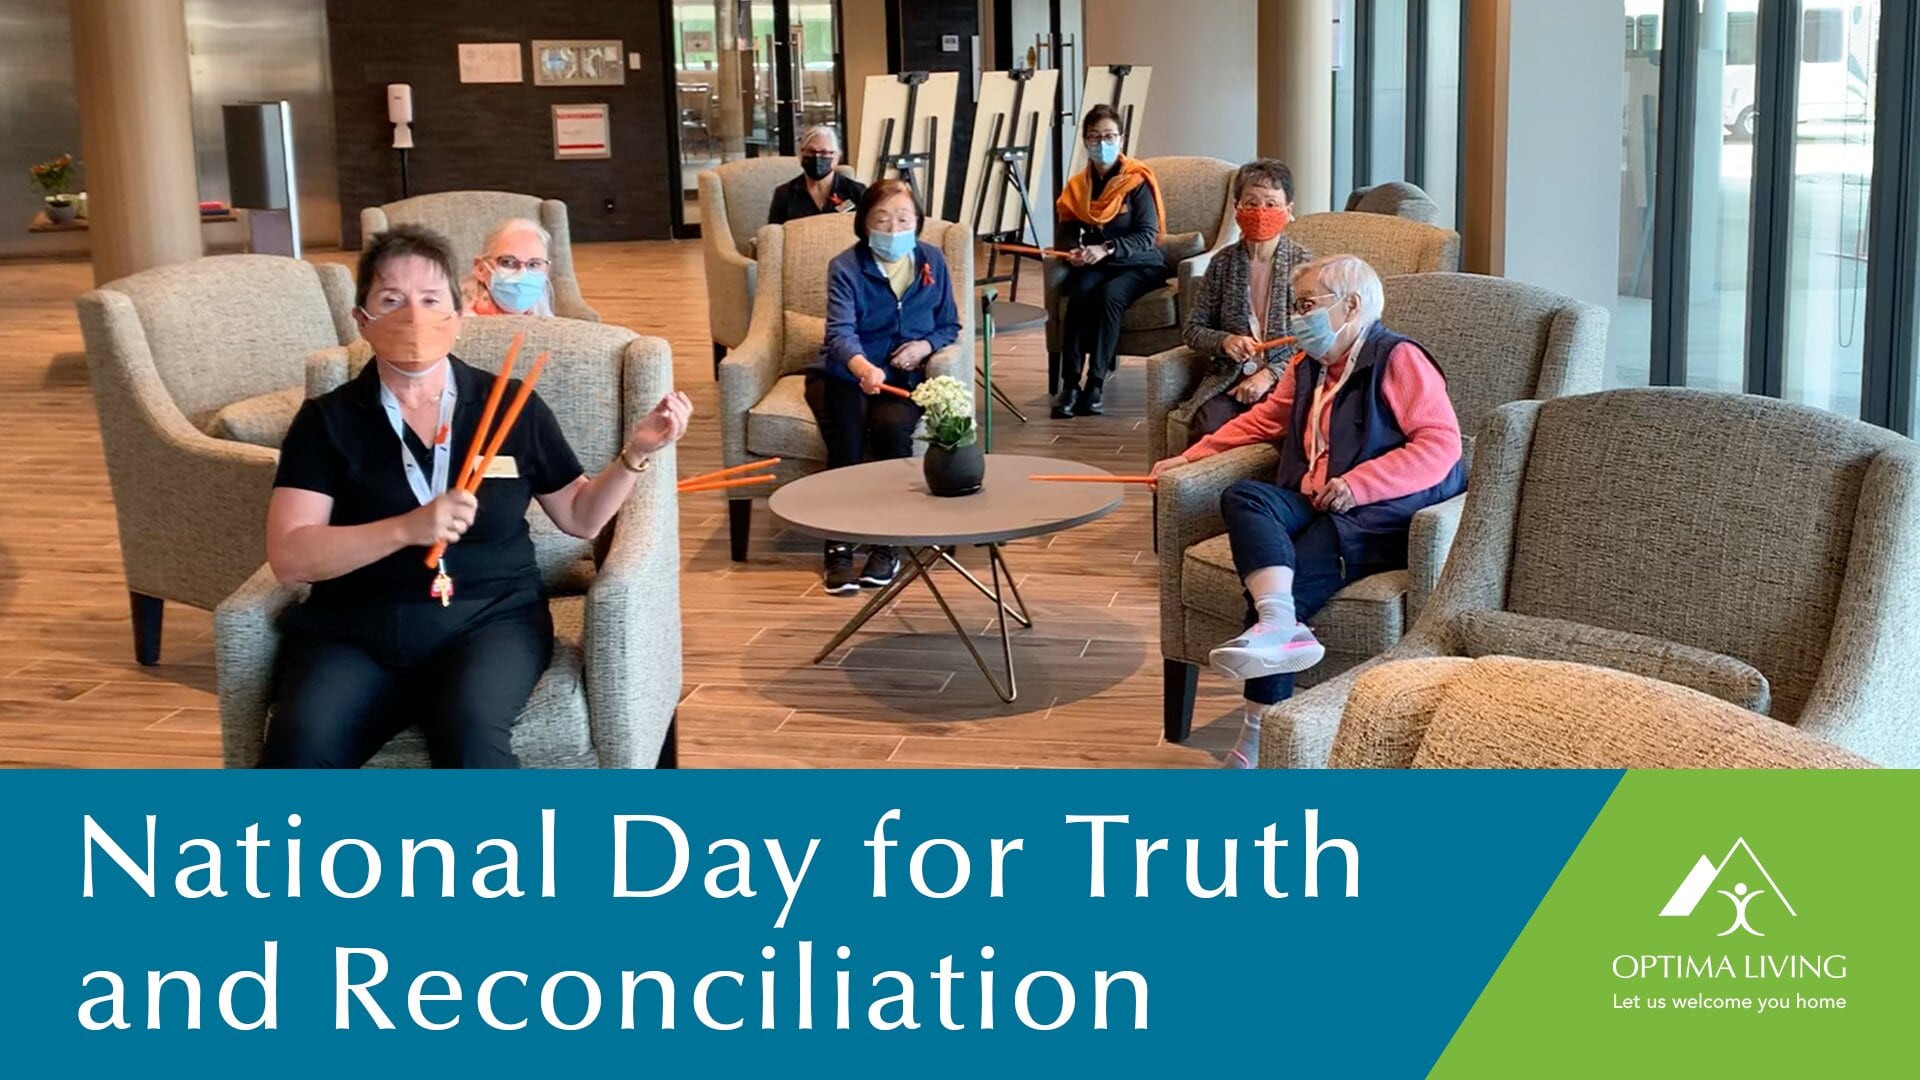 A group of elderly people celebrating National Truth Day